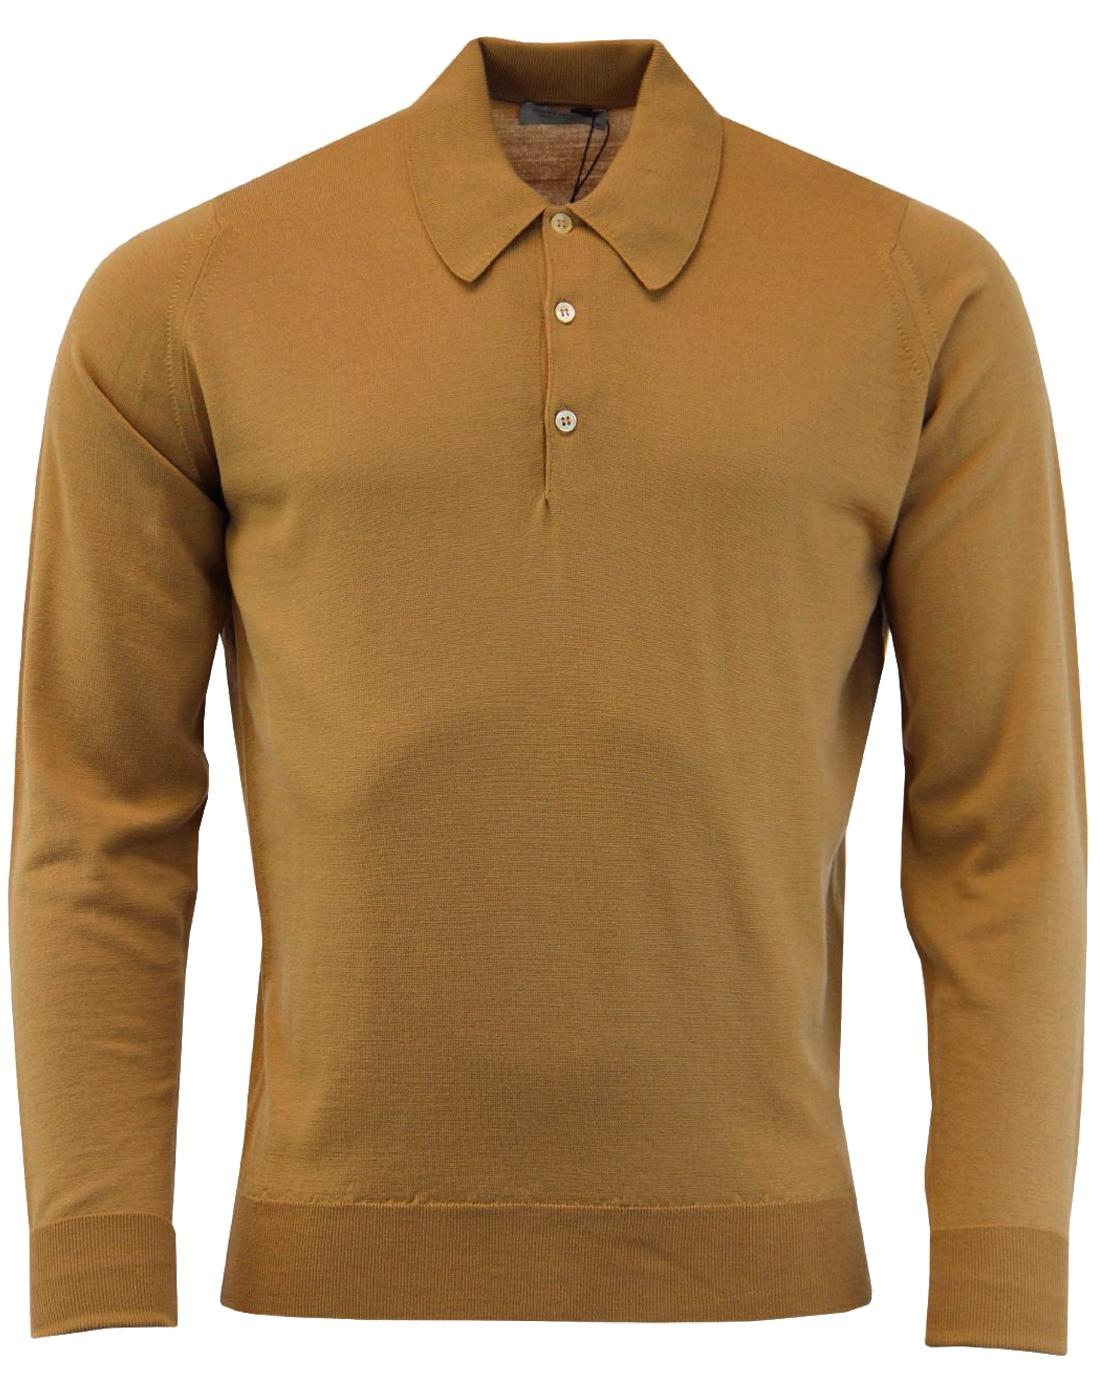 Dorset JOHN SMEDLEY Made in England Knitted Polo C